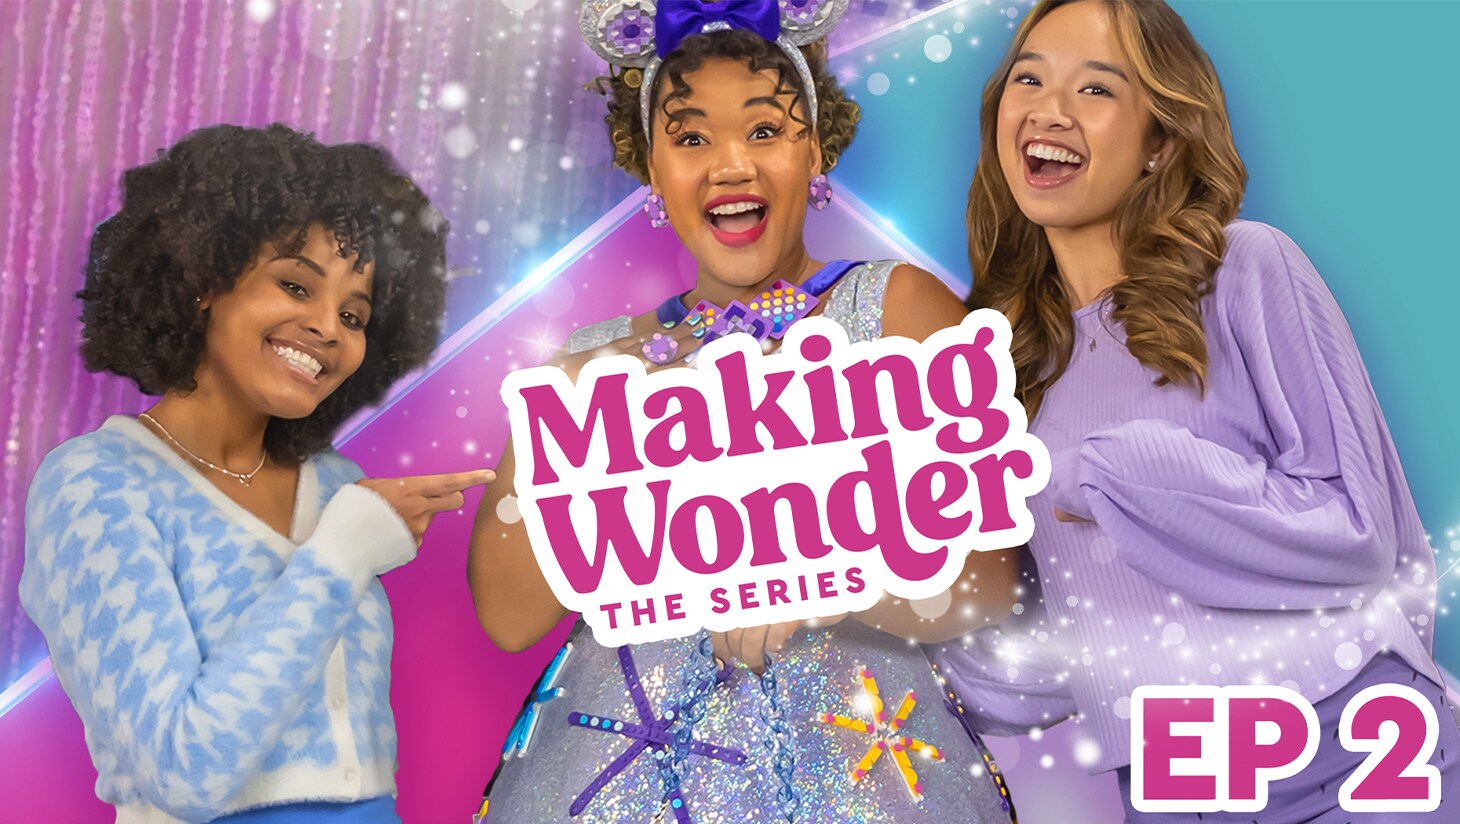 Making the Wonder: The Series | Episode 2 | Three smiling girls are picture on a colorful pink and turquoise background.